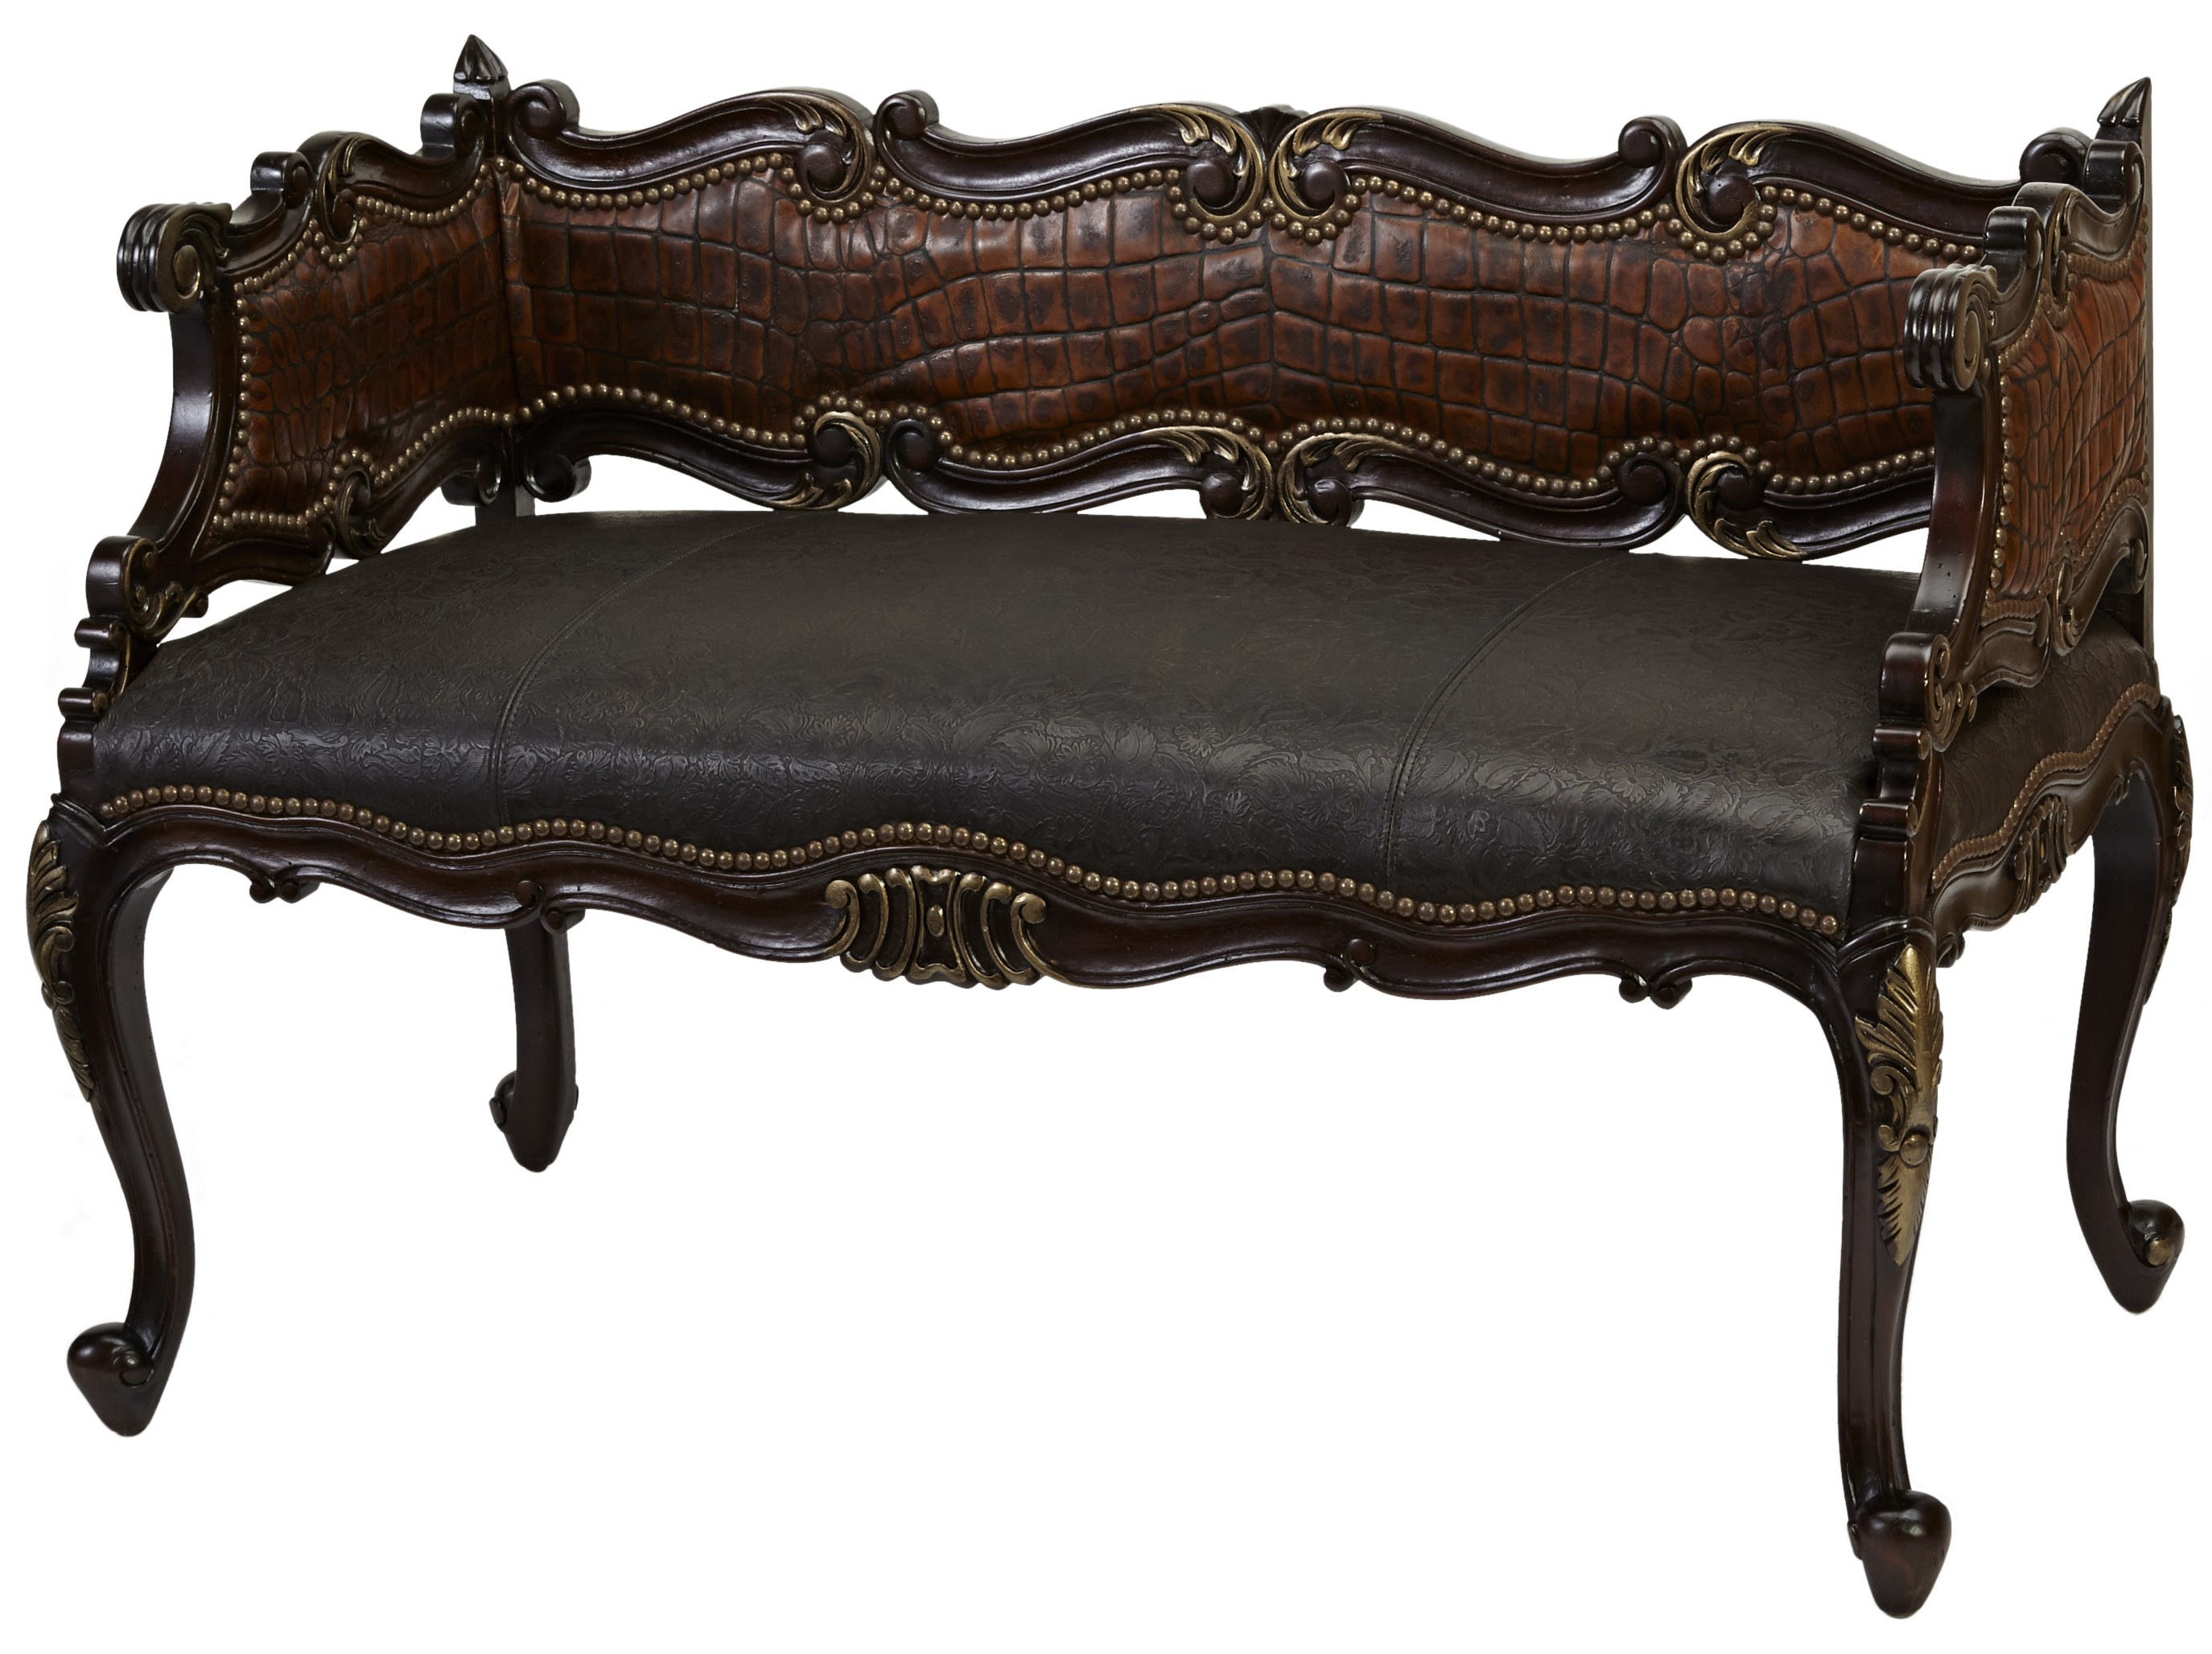 SETTEES, CHAISE, BENCHES Wild west collection with black embossed leather and ornery gator